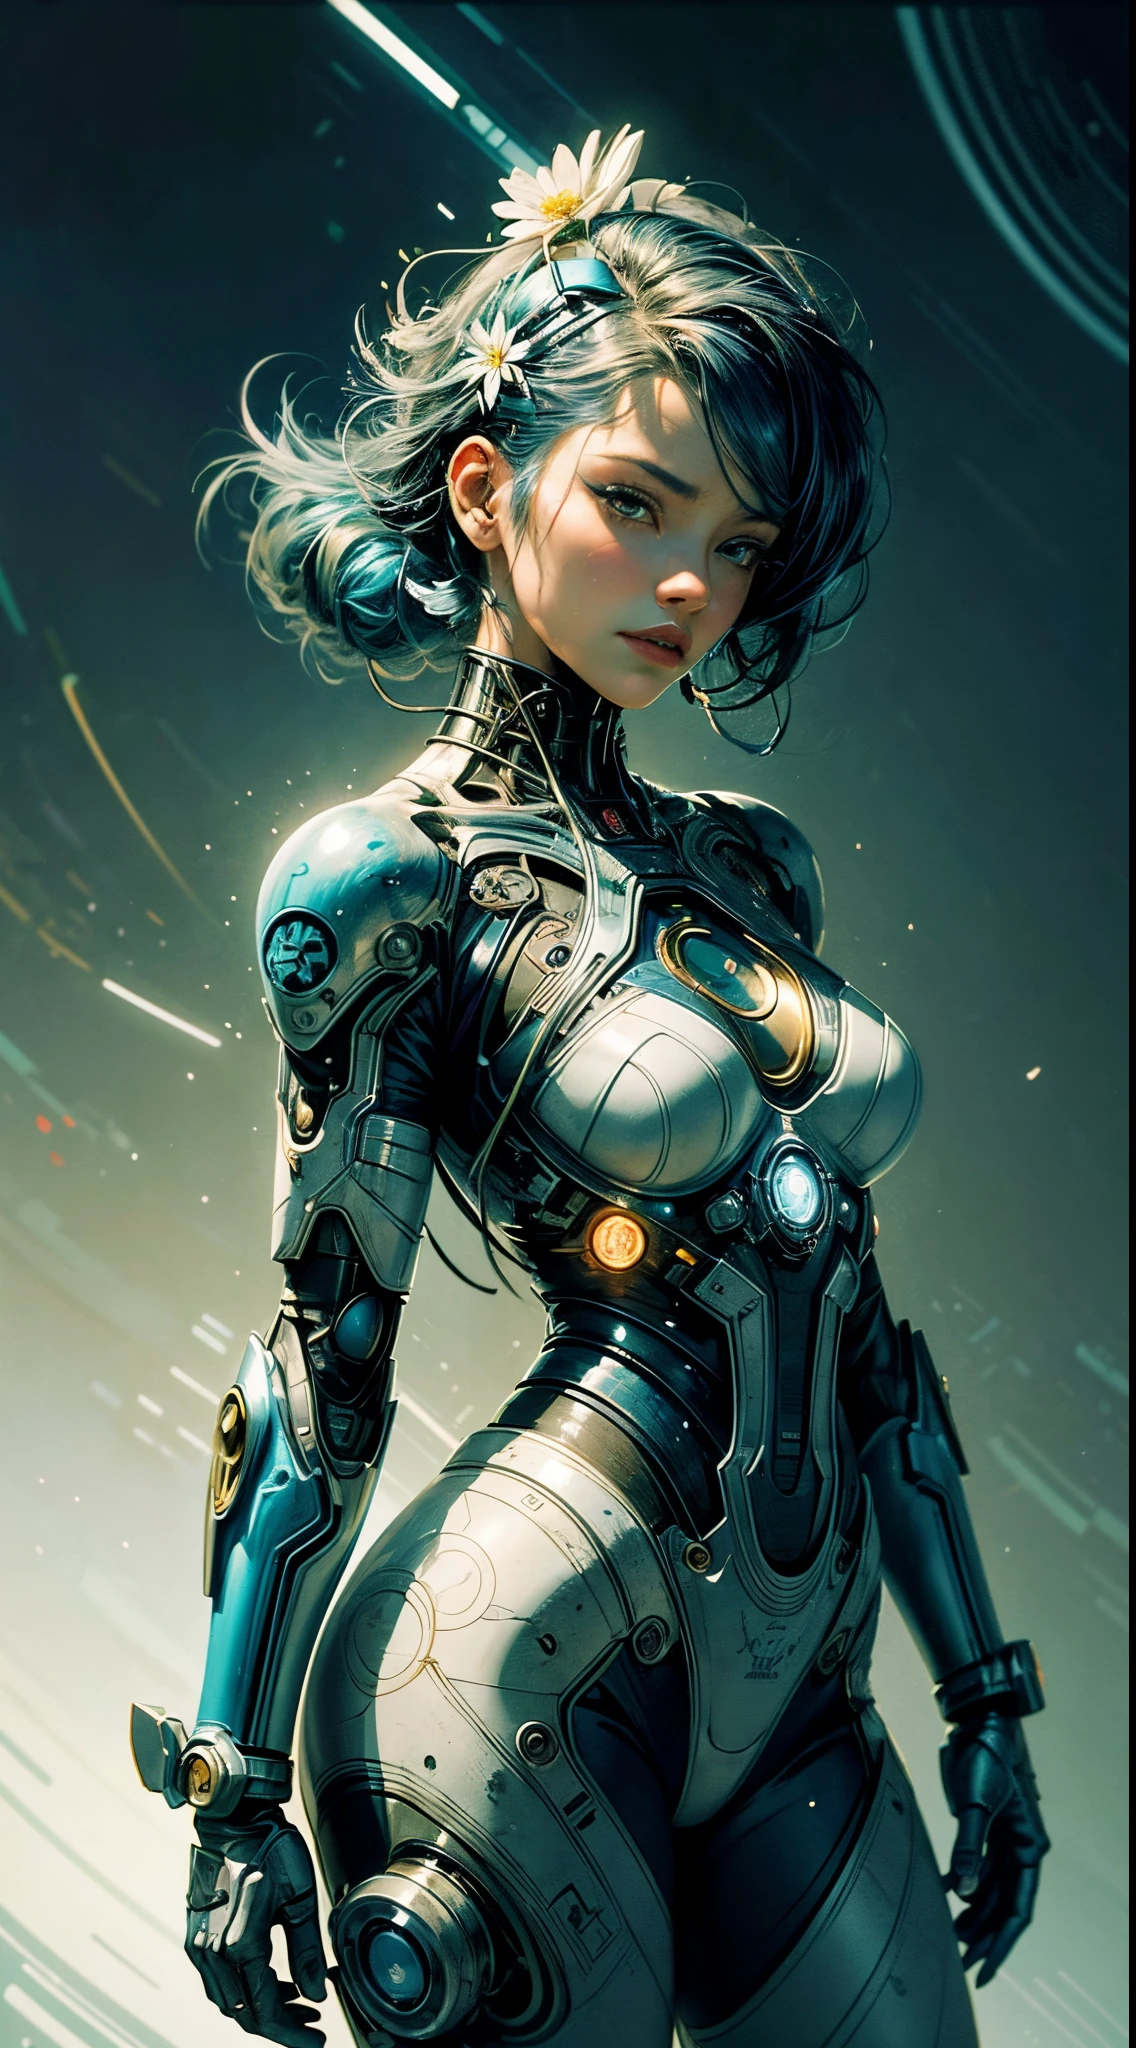 painting of a cyborg woman with a blue hair and a flower in her hair with cyber arms de costas, artgerm and james jean, anna dittmann alberto vargas, in style of anna dittmann, beautiful retro art, a beautiful artwork illustration, inspired by James Jean, james jean and wlop, james jean soft light 4 k, james jean soft light 4k, beautiful digital artwork